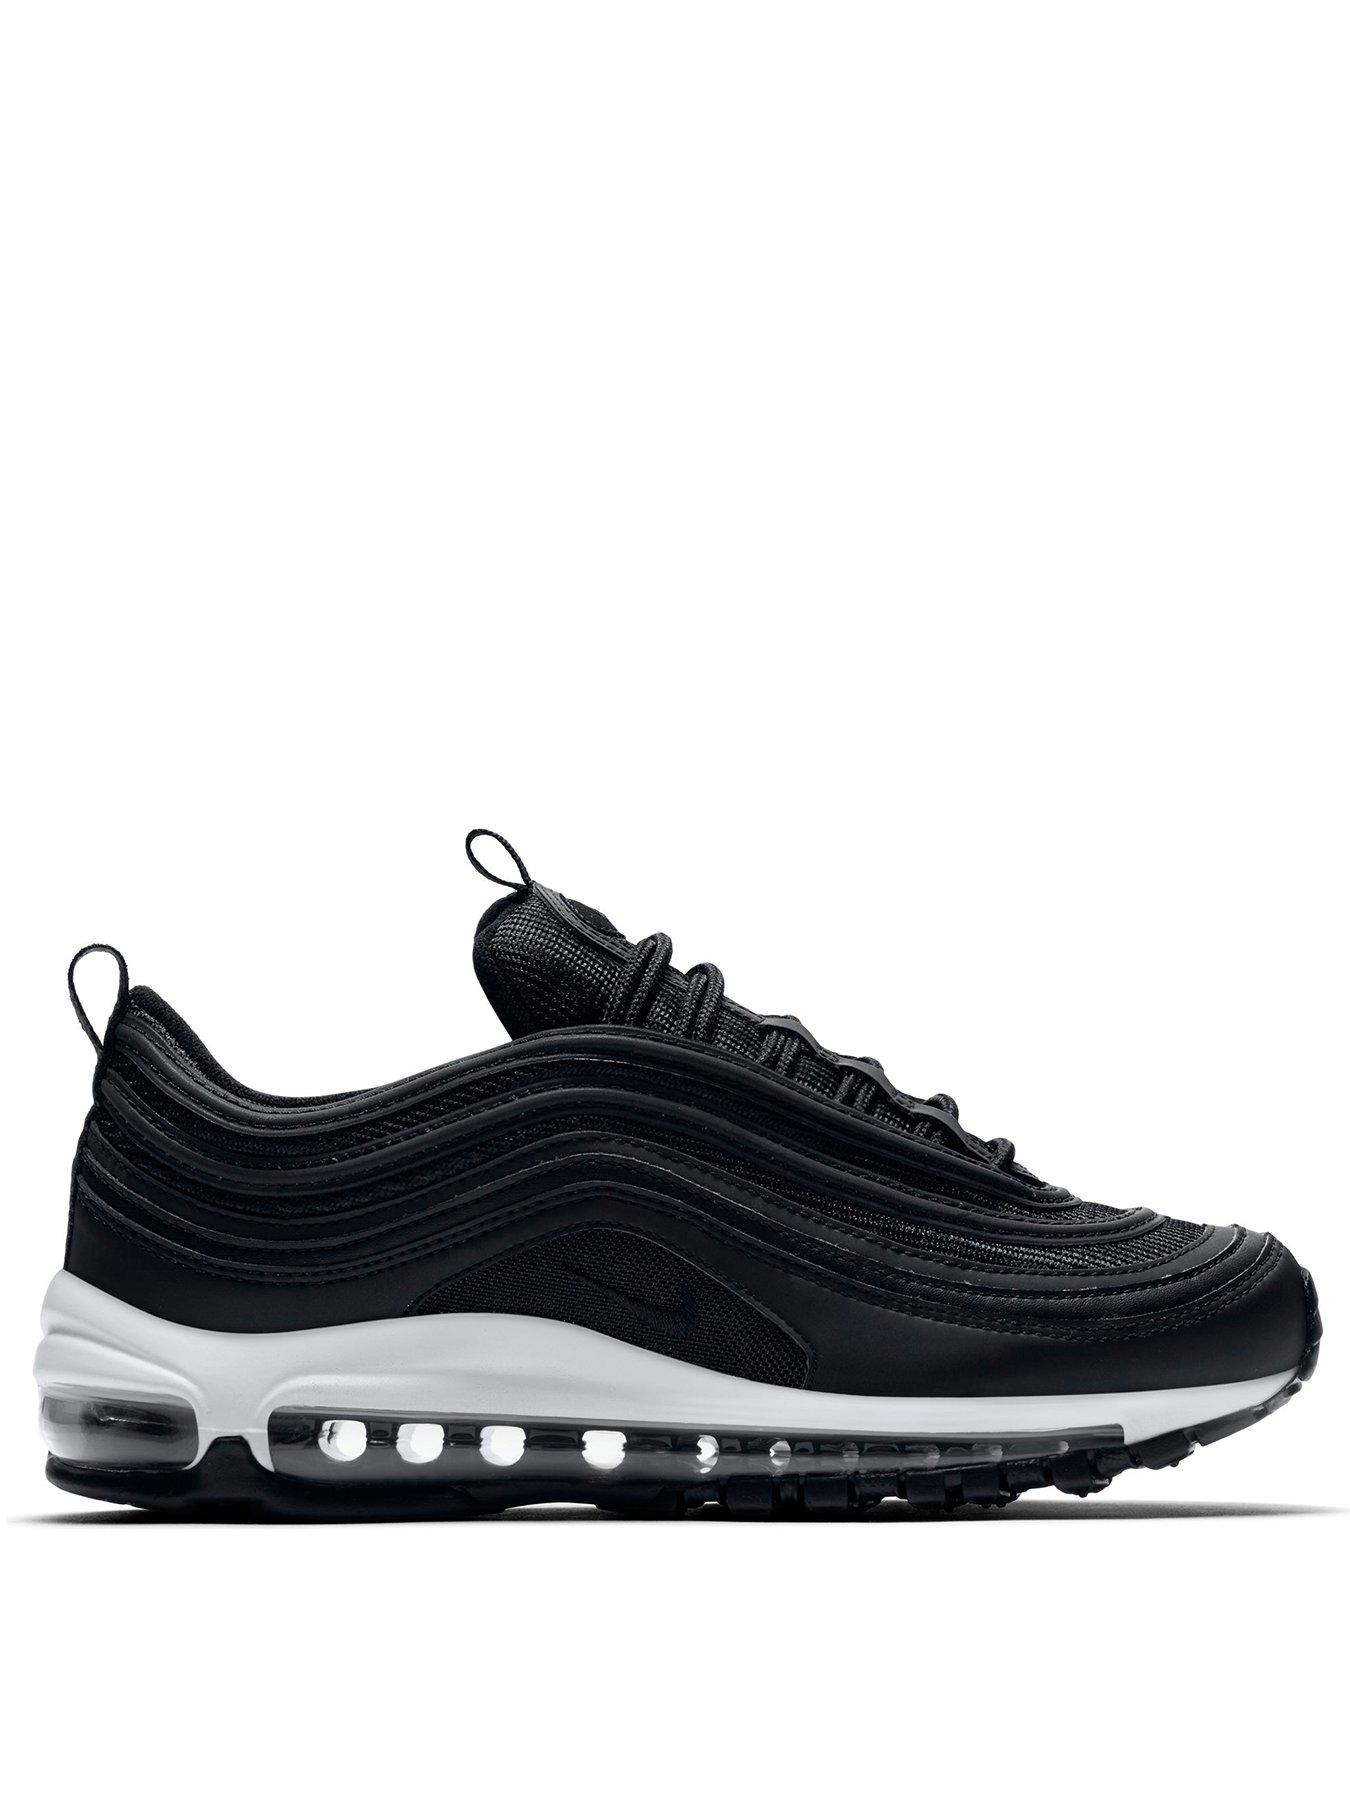 black and white 97s